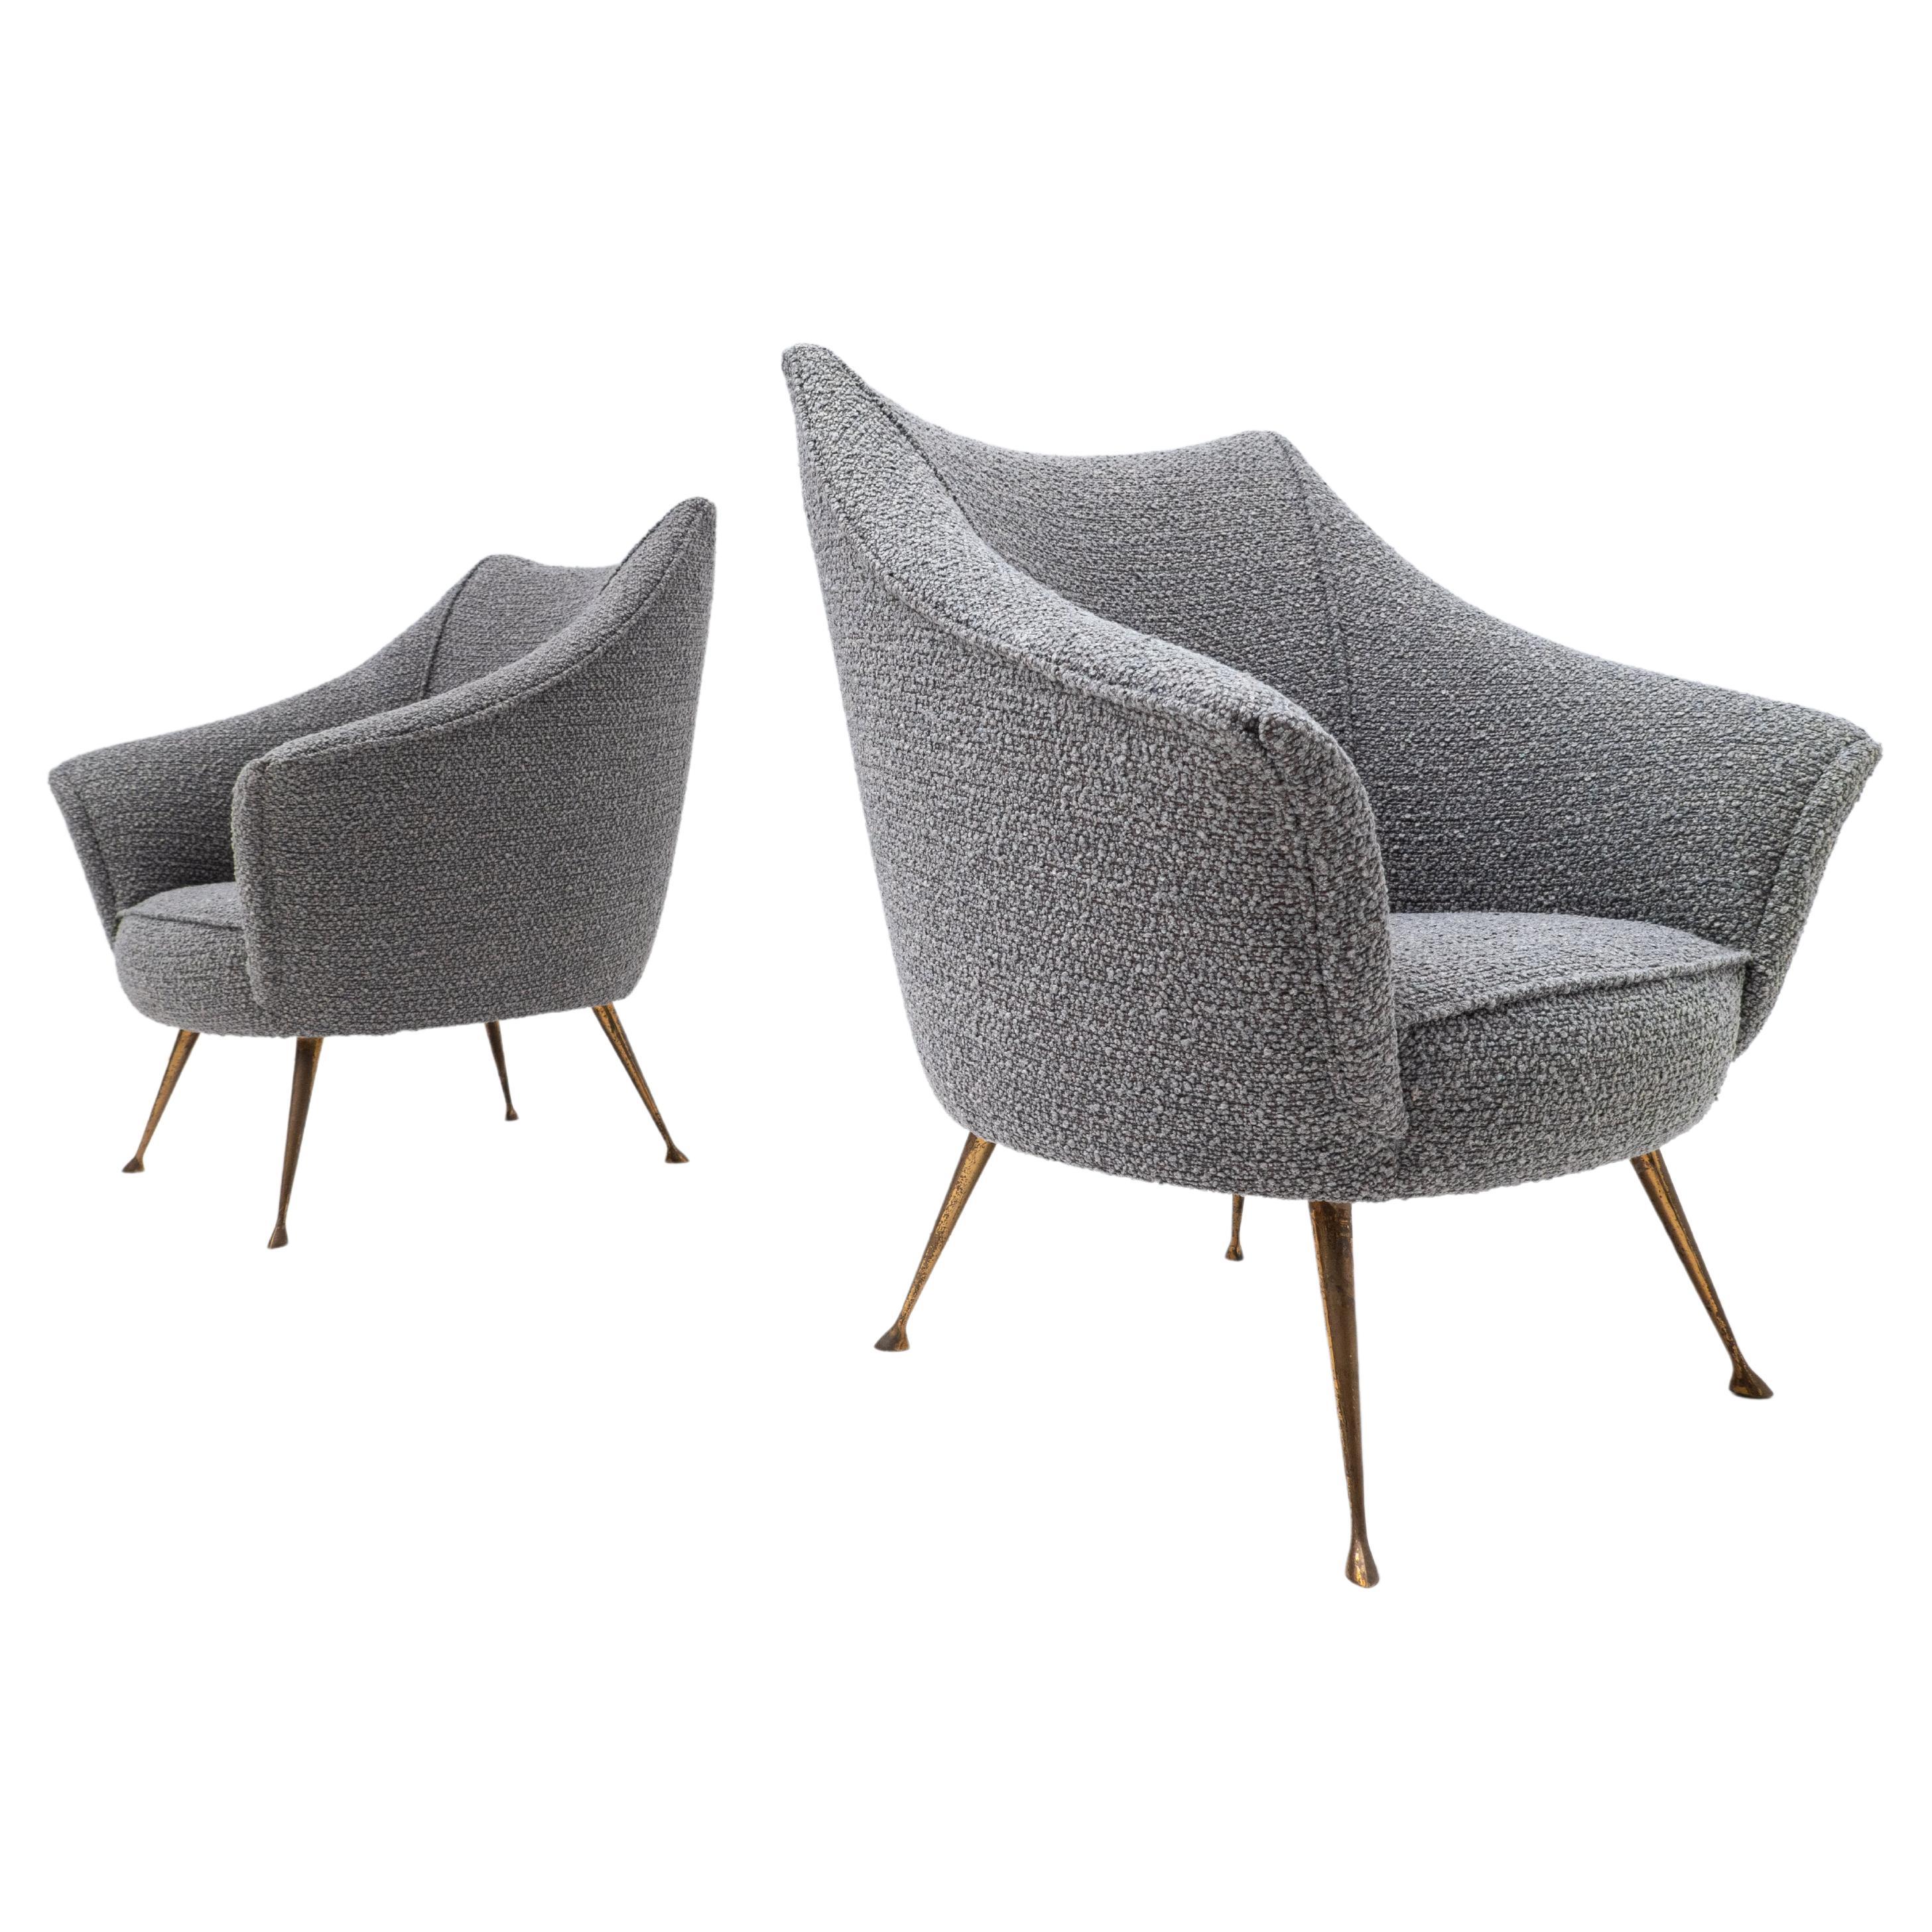 Pair of Mid-Century Grey New Upholstery and Brass Feets Armchairs, Italy, 1950s For Sale